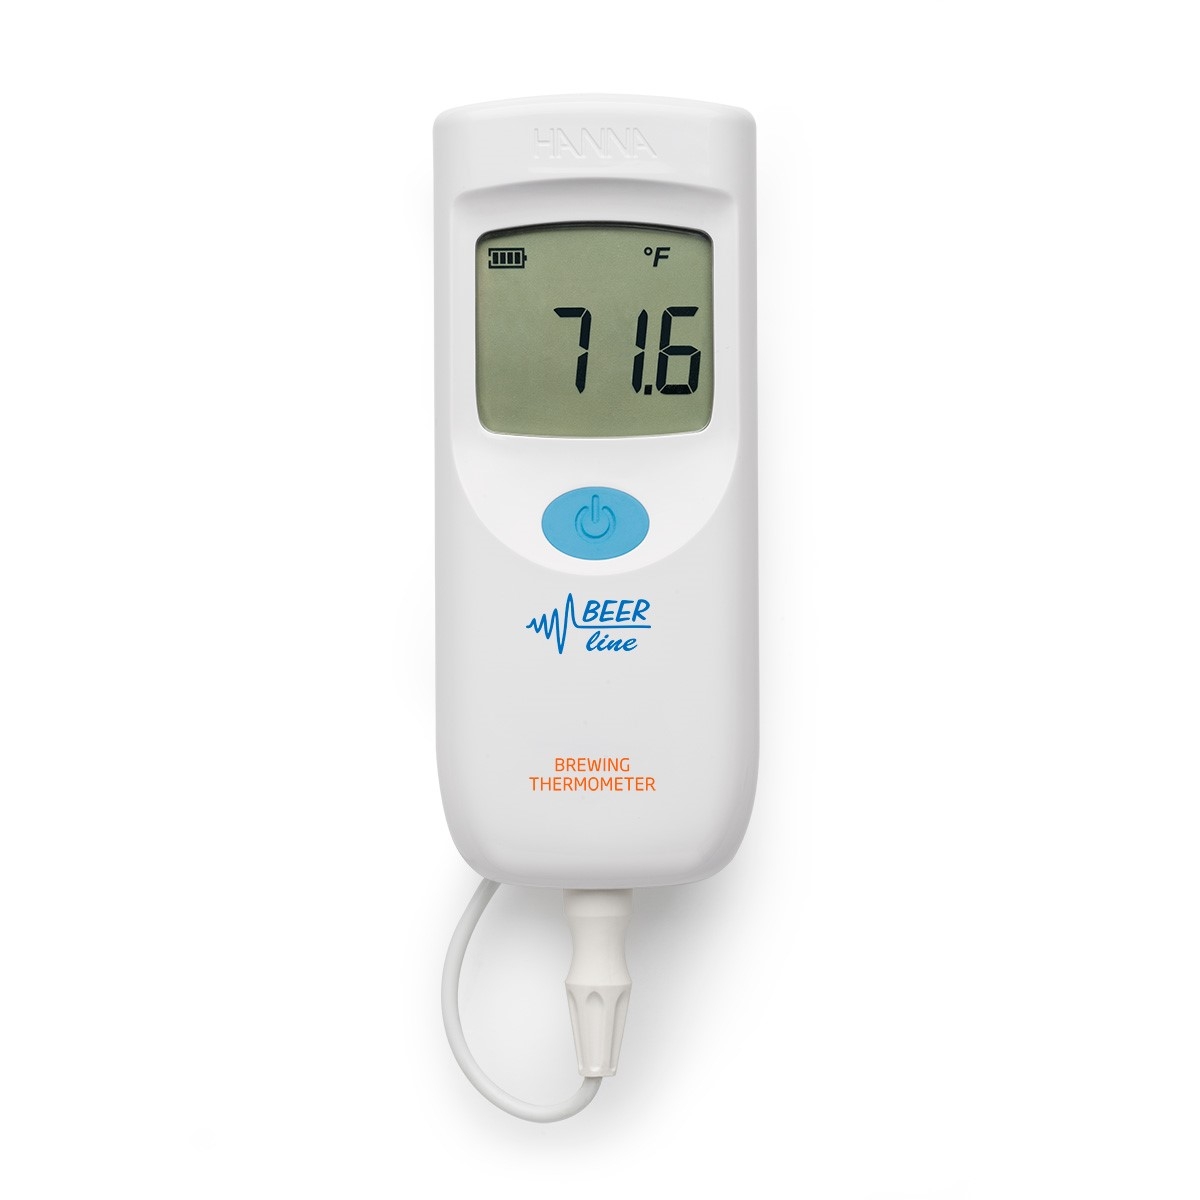 brewing-thermometer-hi935012